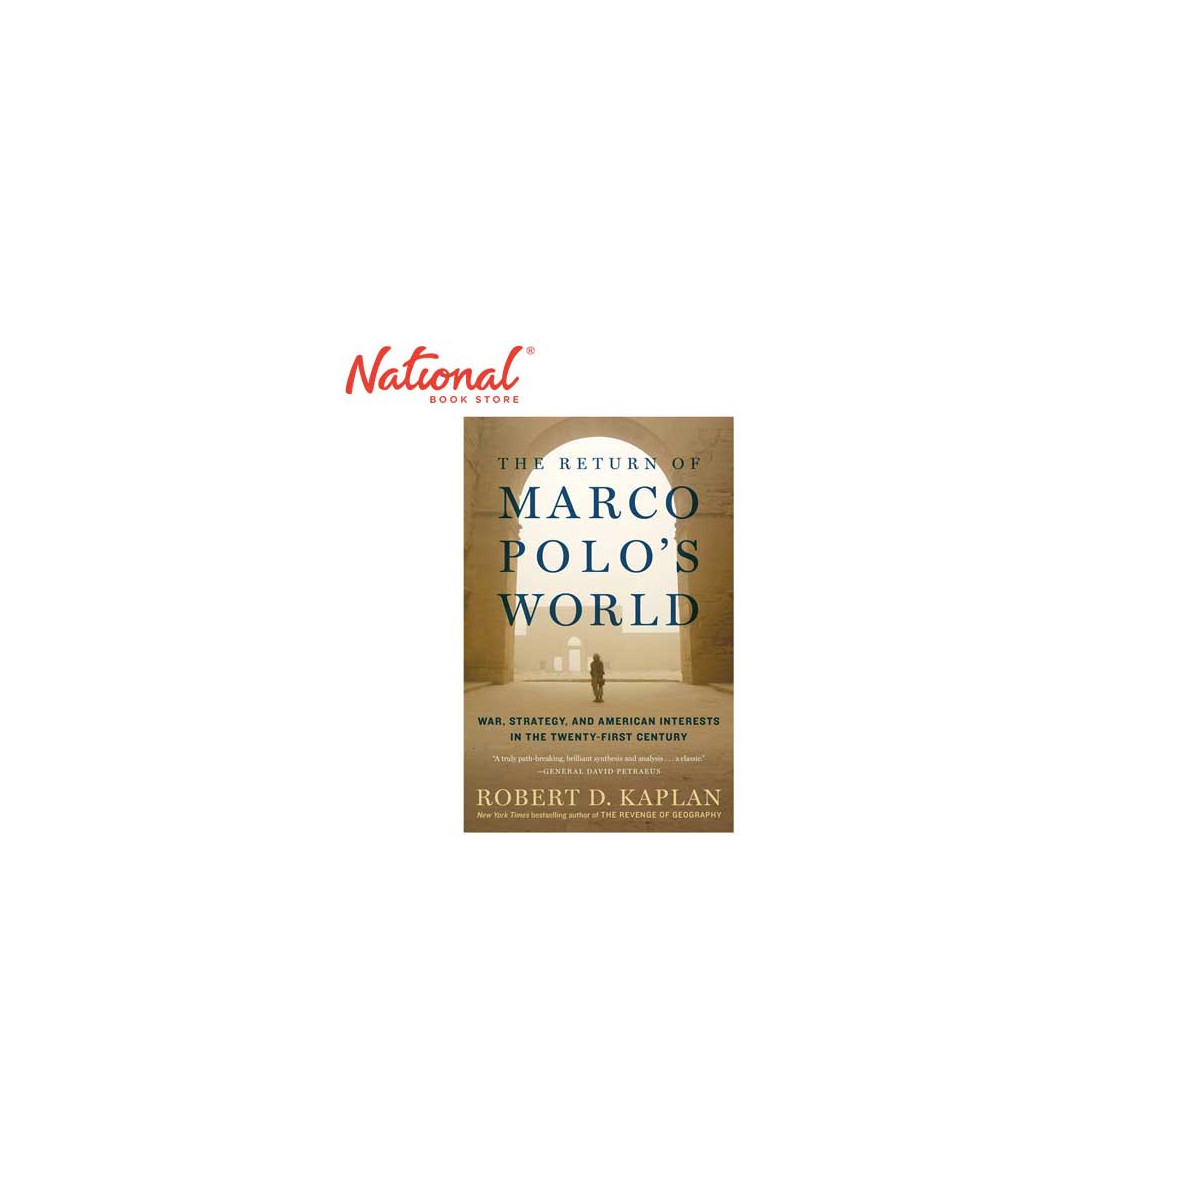 The Return of Marco Polo's World by Robert D. Kaplan - Trade Paperback - History & Biography Books